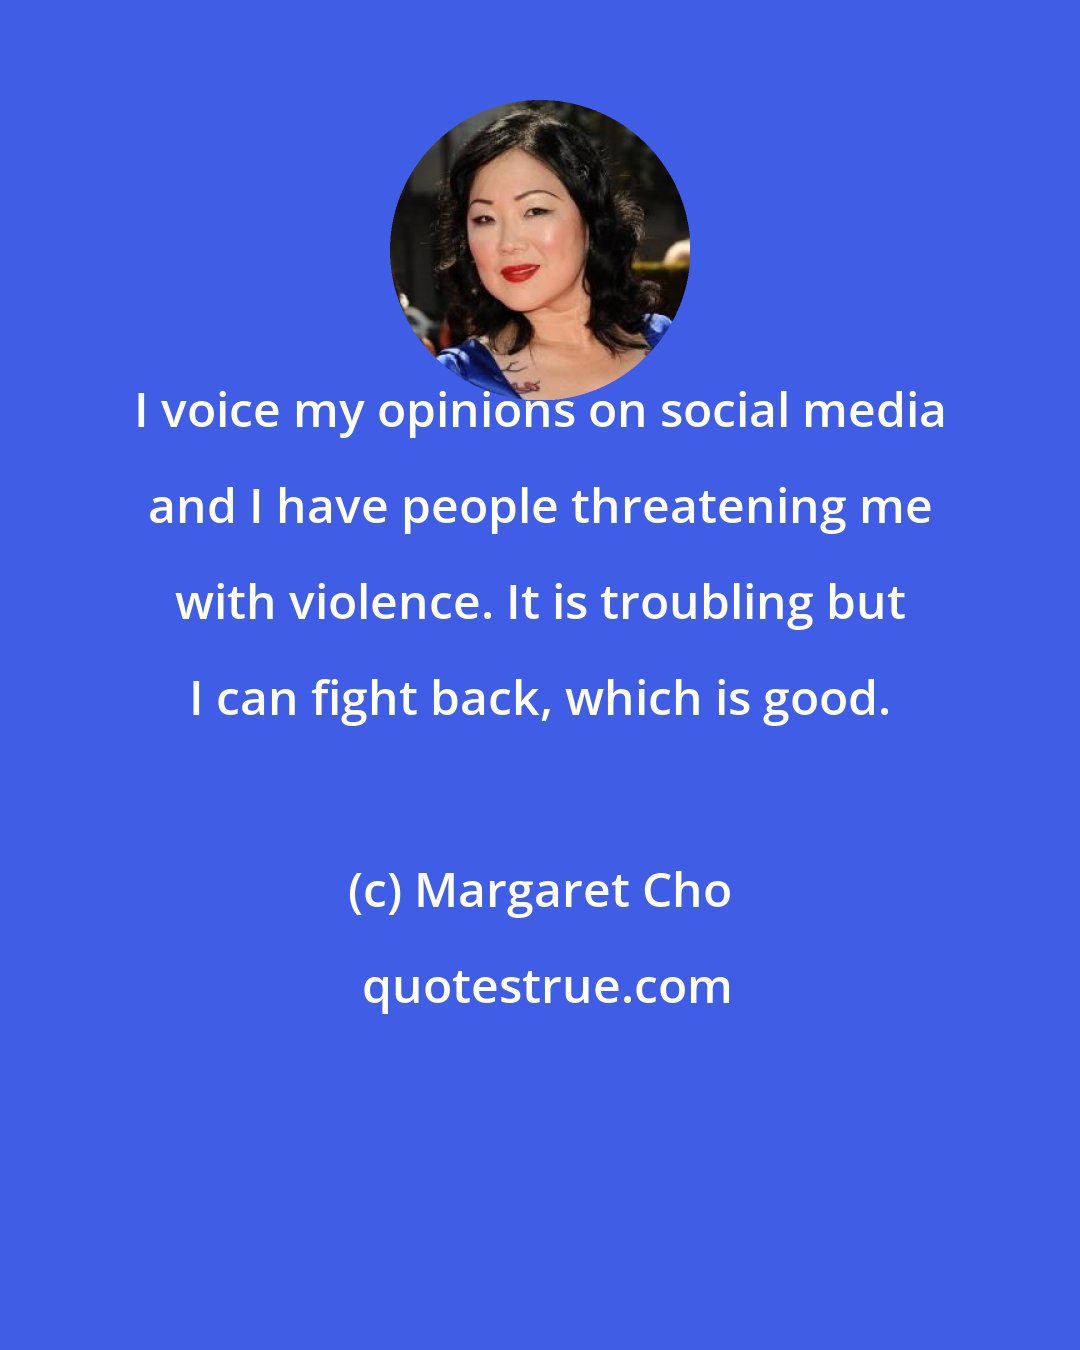 Margaret Cho: I voice my opinions on social media and I have people threatening me with violence. It is troubling but I can fight back, which is good.